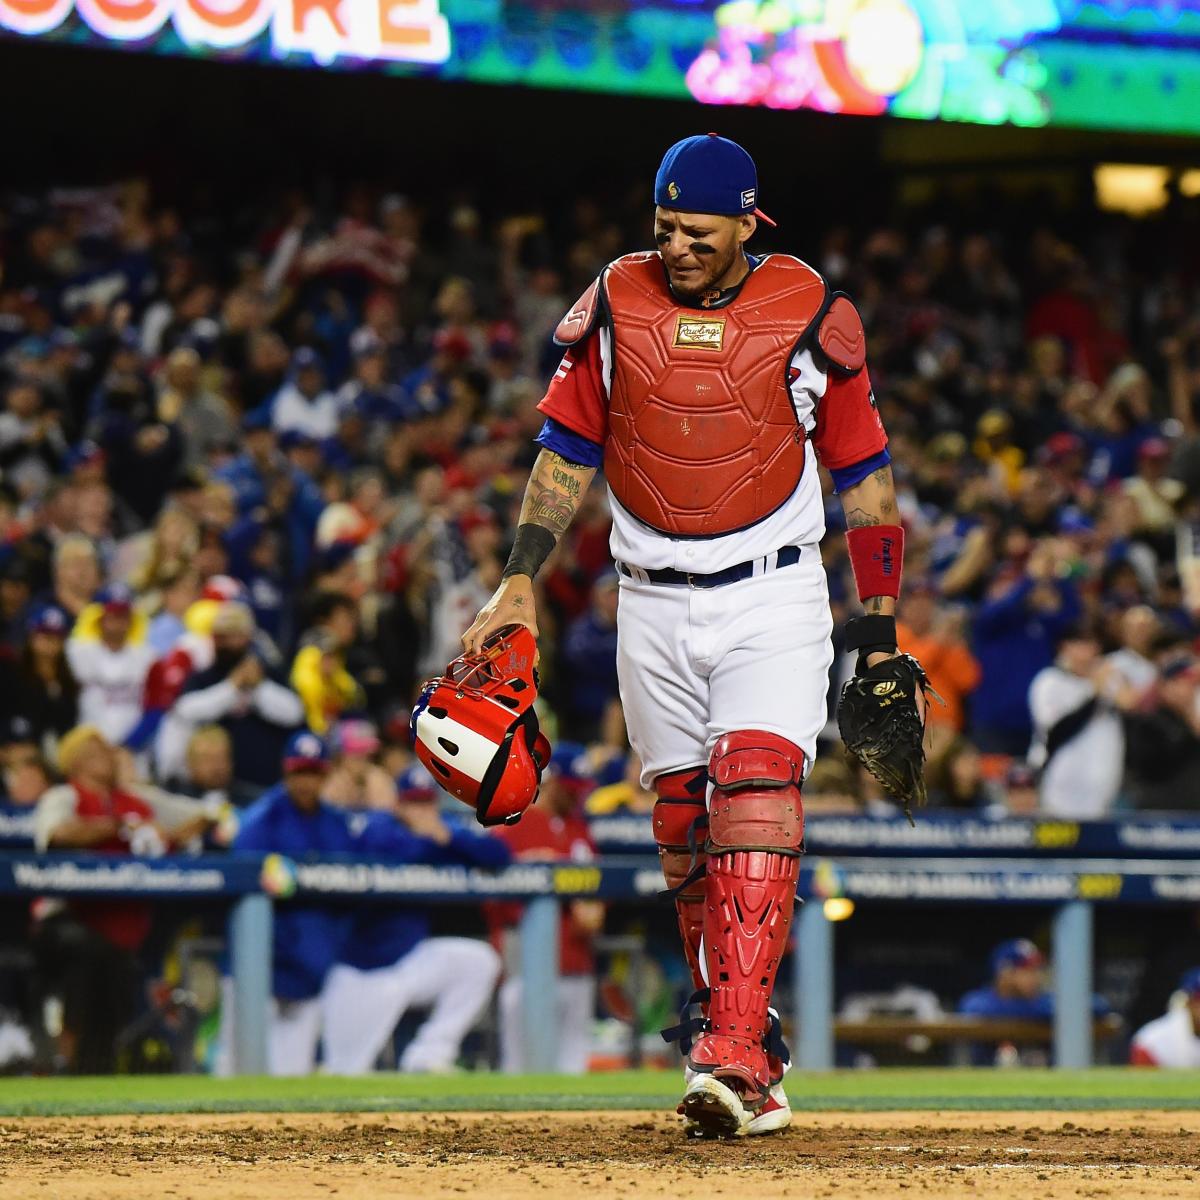 World Baseball Classic 2017: Yadier Molina's arm too strong for Netherlands